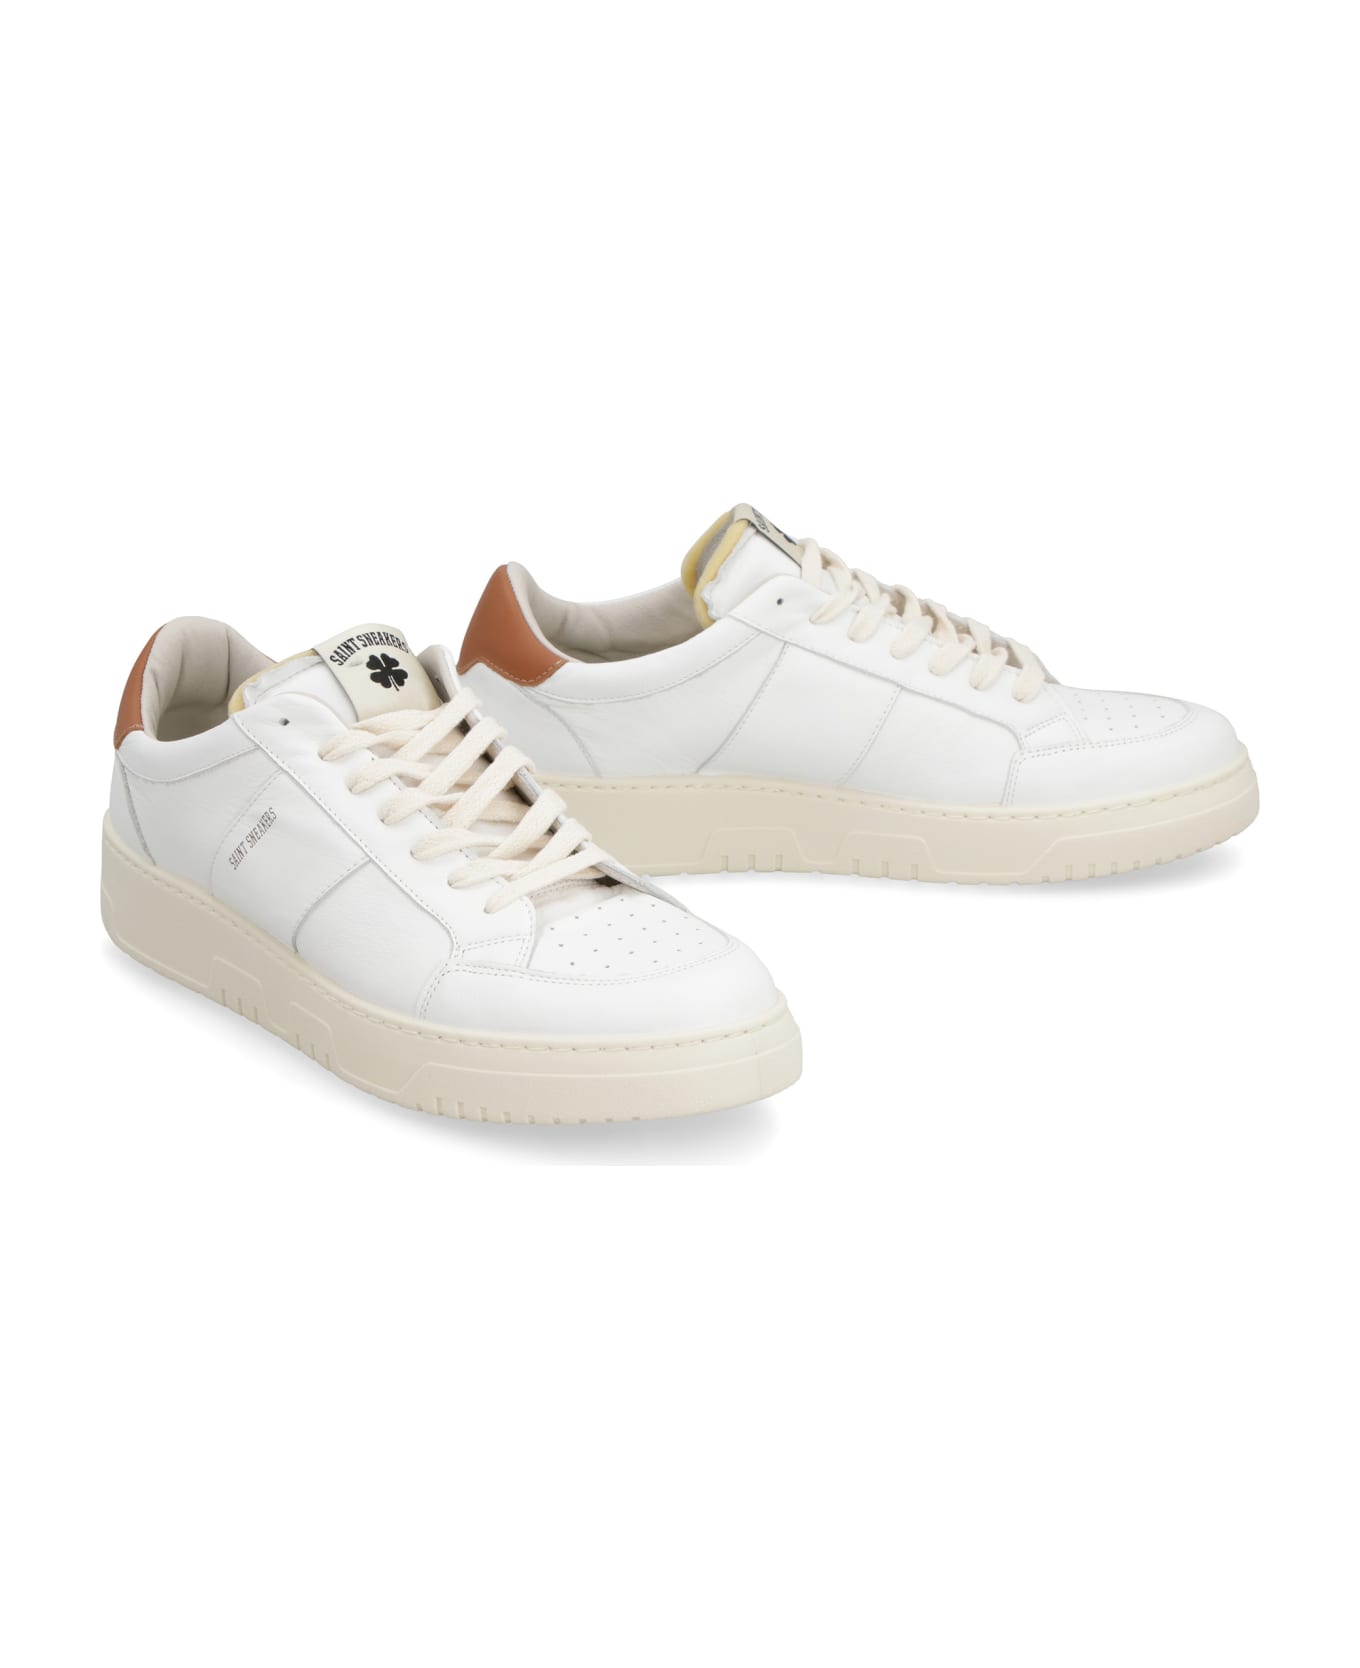 Saint Sneakers Golf Leather Low-top Sneakers - White/brown スニーカー